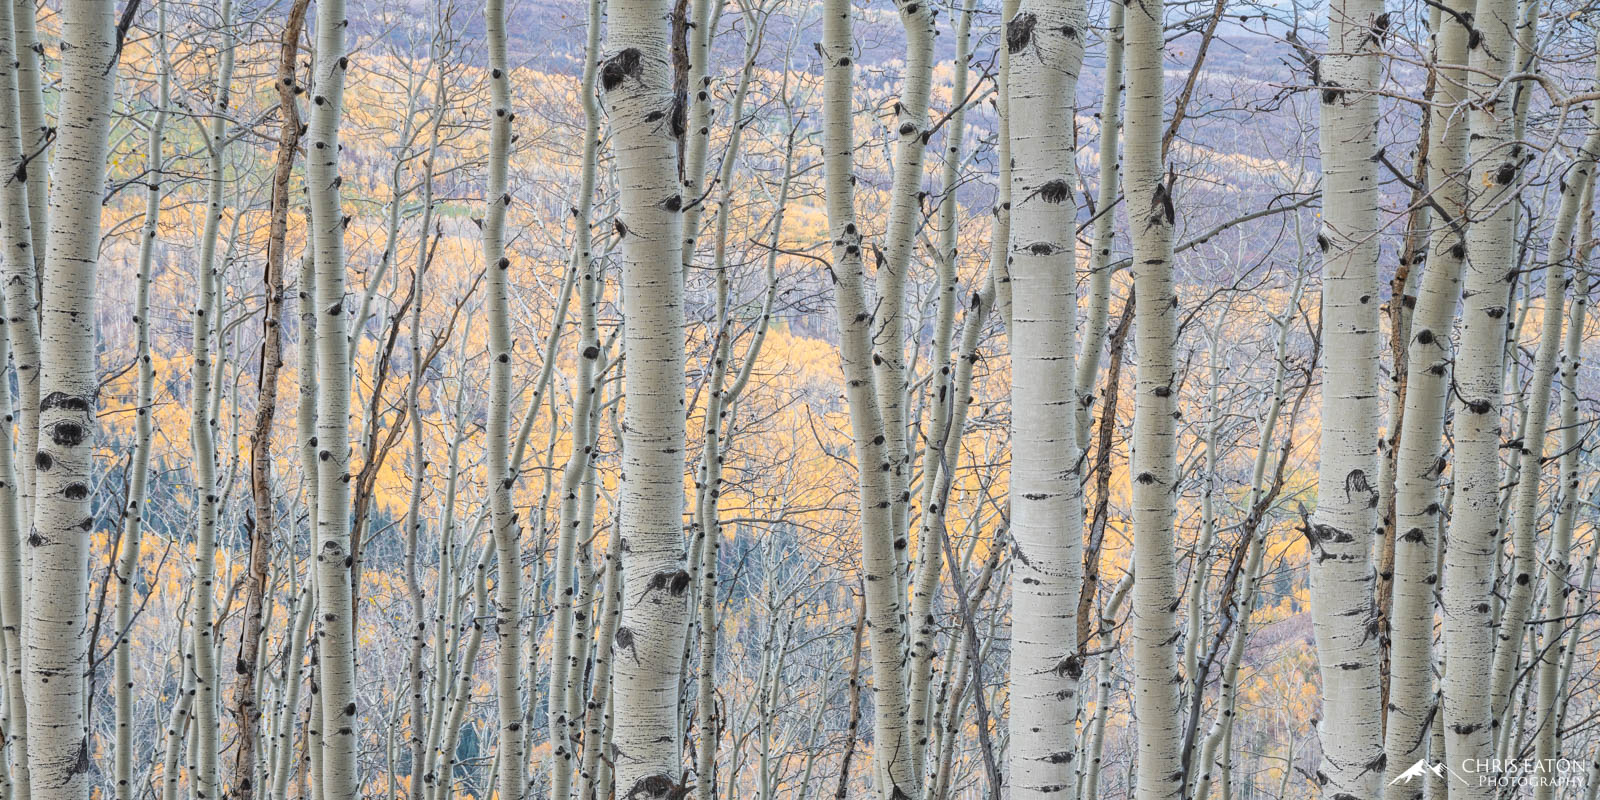 Soft early morning light bathes the Aspen gold of a distant hillside seen through the bare Aspen (Populus tremuloides) trees...